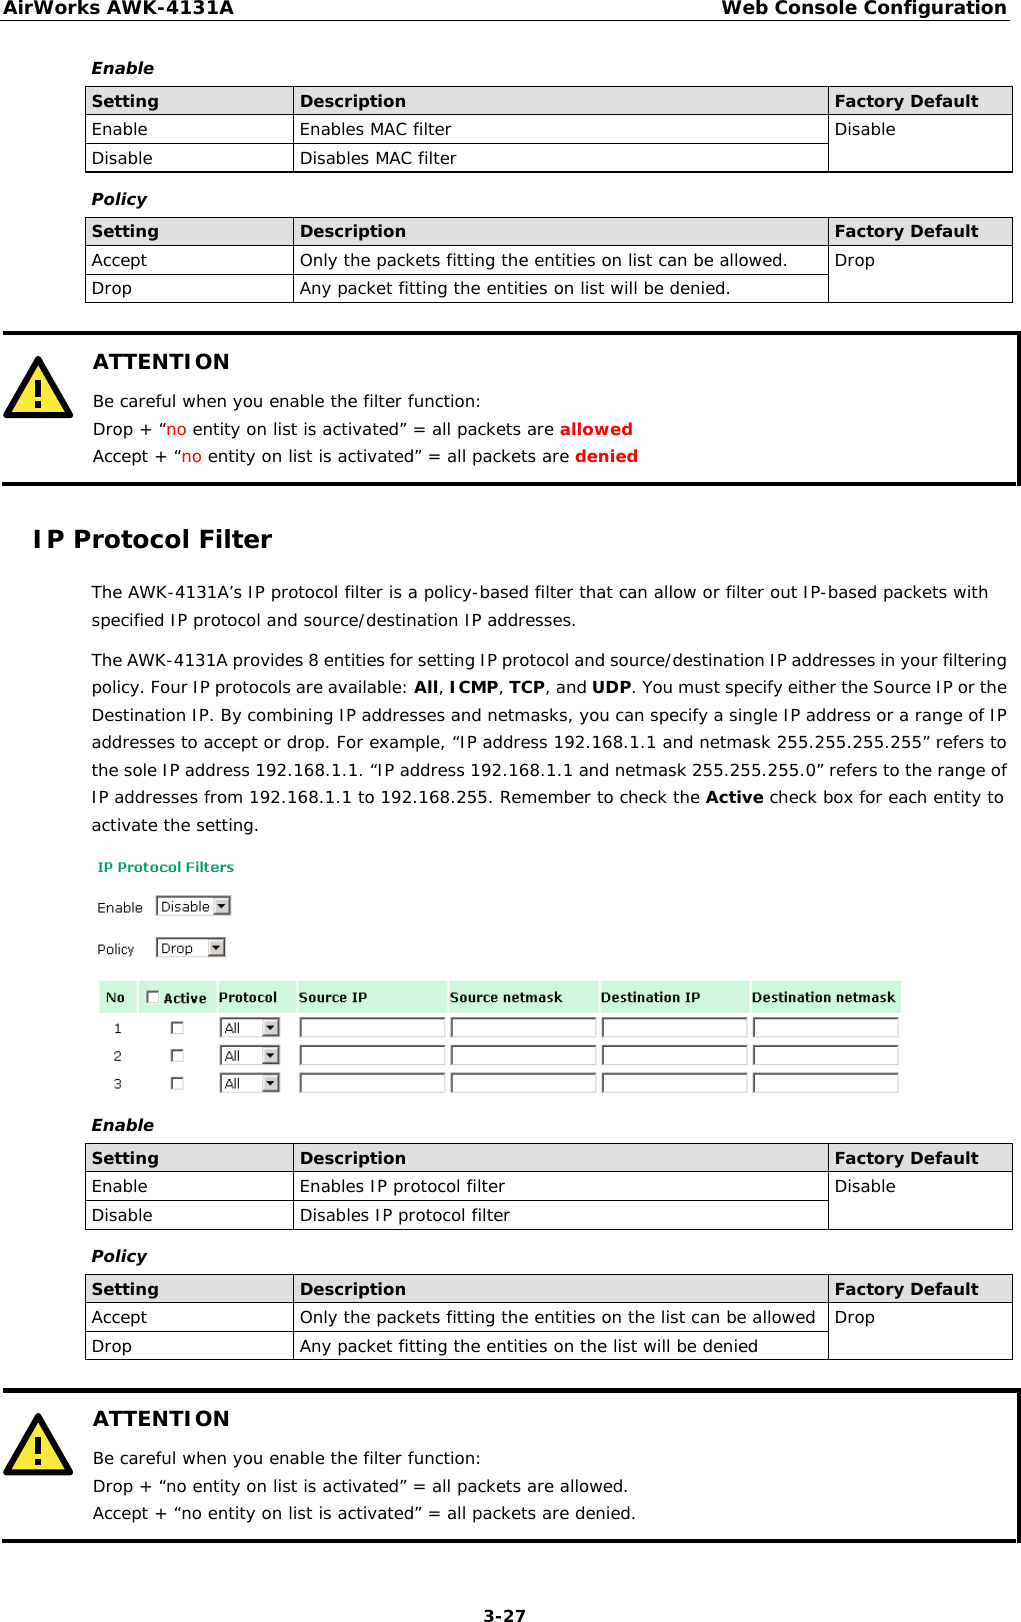 AirWorks AWK-4131A Web Console Configuration  3-27 Enable Setting Description Factory Default Enable Enables MAC filter Disable Disable Disables MAC filter Policy Setting Description Factory Default Accept Only the packets fitting the entities on list can be allowed. Drop Drop Any packet fitting the entities on list will be denied.   ATTENTION Be careful when you enable the filter function: Drop + “no entity on list is activated” = all packets are allowed Accept + “no entity on list is activated” = all packets are denied  IP Protocol Filter The AWK-4131A’s IP protocol filter is a policy-based filter that can allow or filter out IP-based packets with specified IP protocol and source/destination IP addresses.  The AWK-4131A provides 8 entities for setting IP protocol and source/destination IP addresses in your filtering policy. Four IP protocols are available: All, ICMP, TCP, and UDP. You must specify either the Source IP or the Destination IP. By combining IP addresses and netmasks, you can specify a single IP address or a range of IP addresses to accept or drop. For example, “IP address 192.168.1.1 and netmask 255.255.255.255” refers to the sole IP address 192.168.1.1. “IP address 192.168.1.1 and netmask 255.255.255.0” refers to the range of IP addresses from 192.168.1.1 to 192.168.255. Remember to check the Active check box for each entity to activate the setting.  Enable Setting Description Factory Default Enable Enables IP protocol filter Disable Disable Disables IP protocol filter Policy Setting Description Factory Default Accept Only the packets fitting the entities on the list can be allowed Drop Drop Any packet fitting the entities on the list will be denied   ATTENTION Be careful when you enable the filter function: Drop + “no entity on list is activated” = all packets are allowed. Accept + “no entity on list is activated” = all packets are denied.  